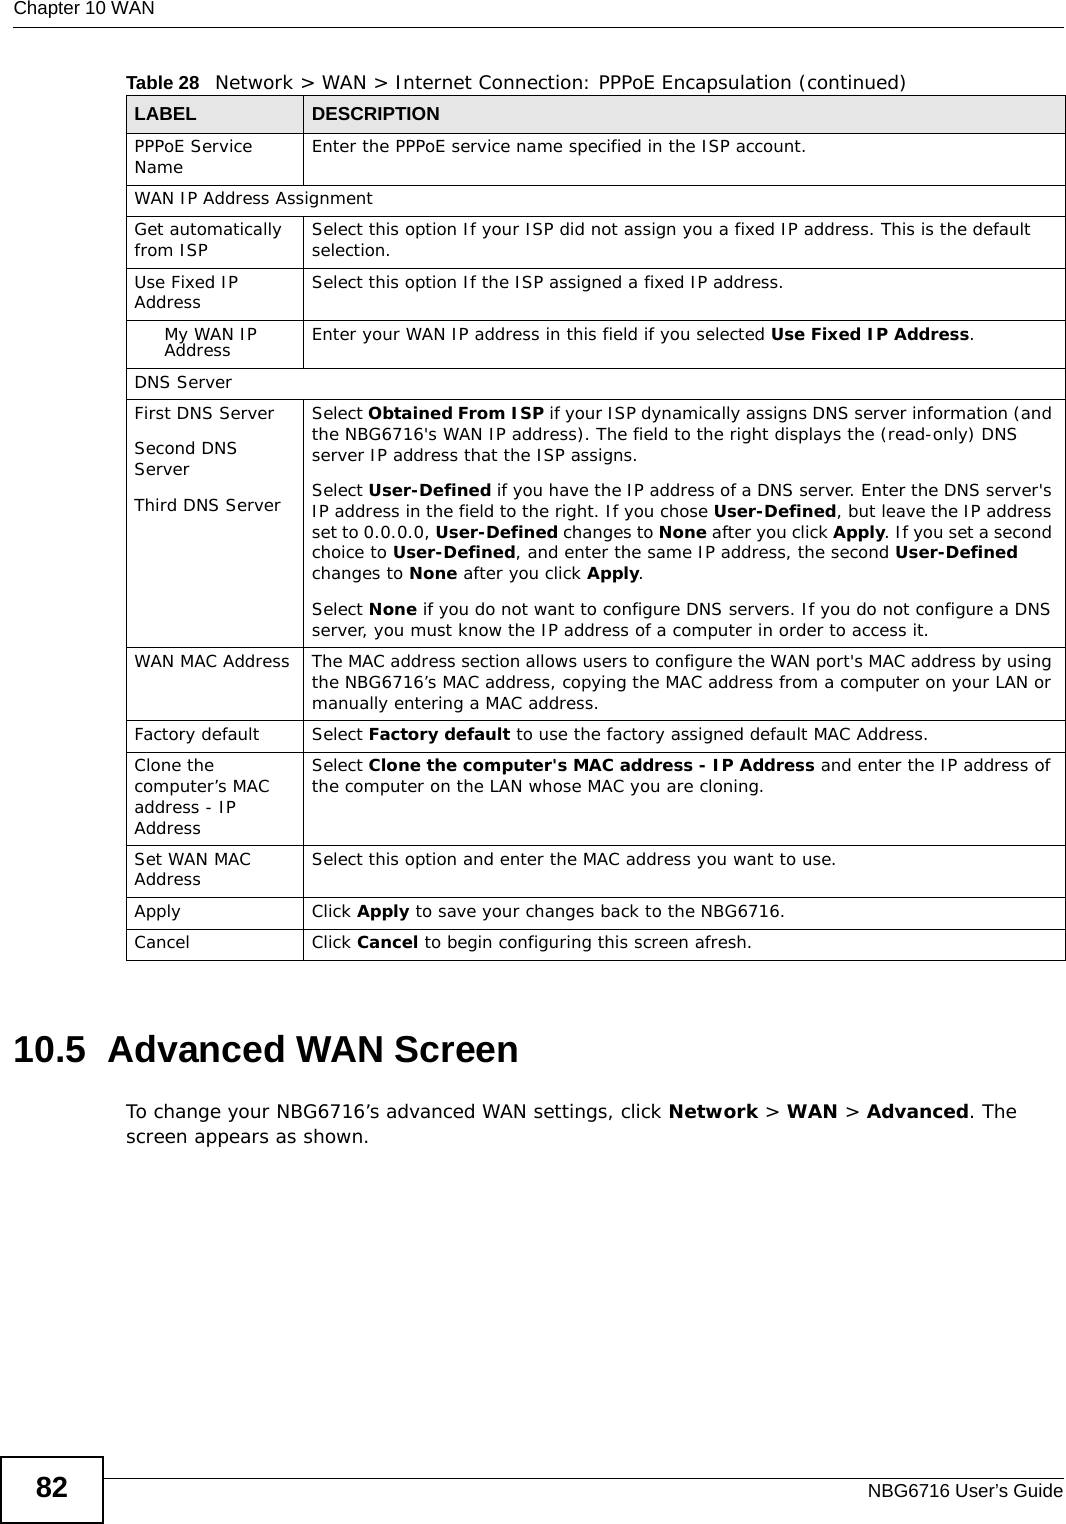 Chapter 10 WANNBG6716 User’s Guide8210.5  Advanced WAN ScreenTo change your NBG6716’s advanced WAN settings, click Network &gt; WAN &gt; Advanced. The screen appears as shown.PPPoE Service Name  Enter the PPPoE service name specified in the ISP account.WAN IP Address Assignment Get automatically from ISP  Select this option If your ISP did not assign you a fixed IP address. This is the default selection. Use Fixed IP Address Select this option If the ISP assigned a fixed IP address. My WAN IP Address Enter your WAN IP address in this field if you selected Use Fixed IP Address. DNS ServerFirst DNS ServerSecond DNS ServerThird DNS Server Select Obtained From ISP if your ISP dynamically assigns DNS server information (and the NBG6716&apos;s WAN IP address). The field to the right displays the (read-only) DNS server IP address that the ISP assigns. Select User-Defined if you have the IP address of a DNS server. Enter the DNS server&apos;s IP address in the field to the right. If you chose User-Defined, but leave the IP address set to 0.0.0.0, User-Defined changes to None after you click Apply. If you set a second choice to User-Defined, and enter the same IP address, the second User-Defined changes to None after you click Apply. Select None if you do not want to configure DNS servers. If you do not configure a DNS server, you must know the IP address of a computer in order to access it.WAN MAC Address The MAC address section allows users to configure the WAN port&apos;s MAC address by using the NBG6716’s MAC address, copying the MAC address from a computer on your LAN or manually entering a MAC address. Factory default Select Factory default to use the factory assigned default MAC Address.Clone the computer’s MAC address - IP AddressSelect Clone the computer&apos;s MAC address - IP Address and enter the IP address of the computer on the LAN whose MAC you are cloning.Set WAN MAC Address Select this option and enter the MAC address you want to use.Apply Click Apply to save your changes back to the NBG6716.Cancel Click Cancel to begin configuring this screen afresh.Table 28   Network &gt; WAN &gt; Internet Connection: PPPoE Encapsulation (continued)LABEL DESCRIPTION